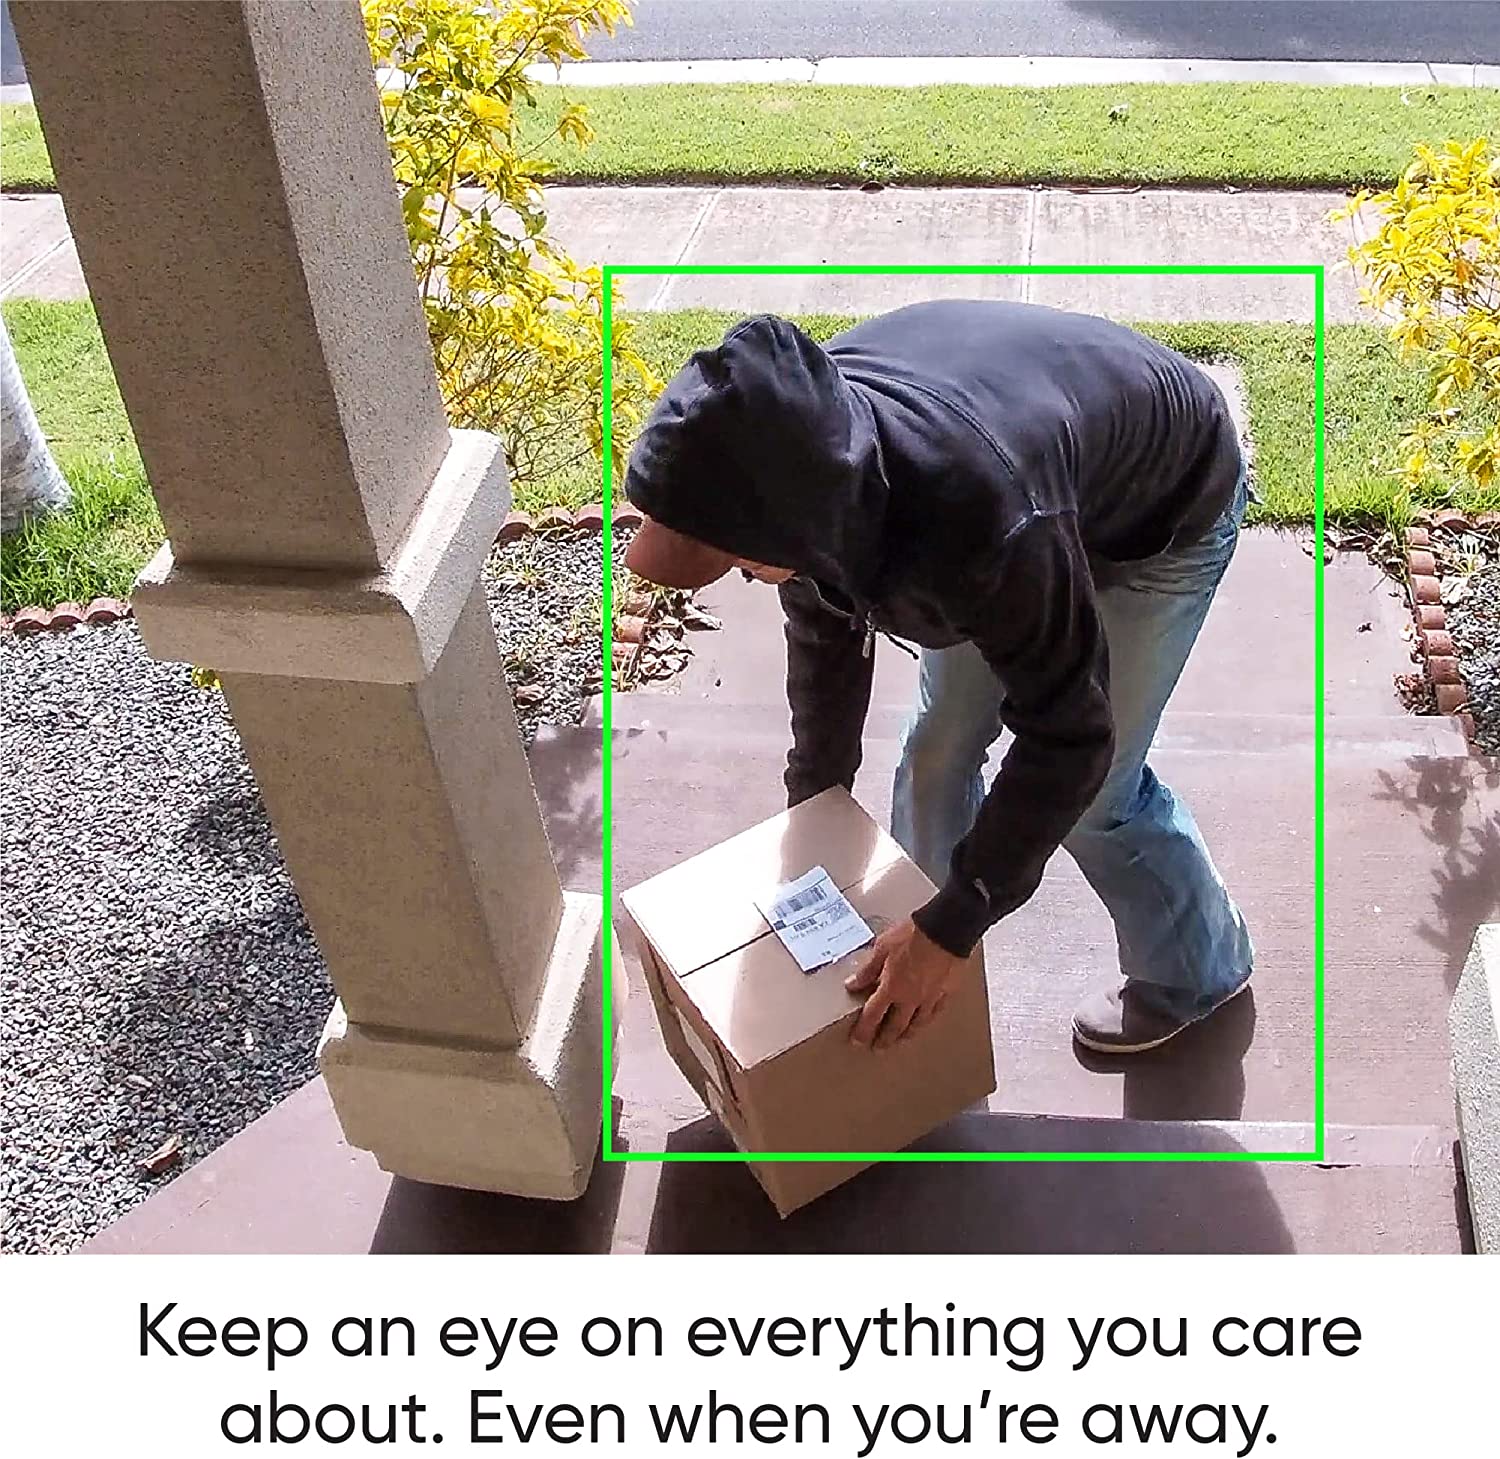 Person grabbing a package from porch. Text overlay "Keep an eye on everything you care about".